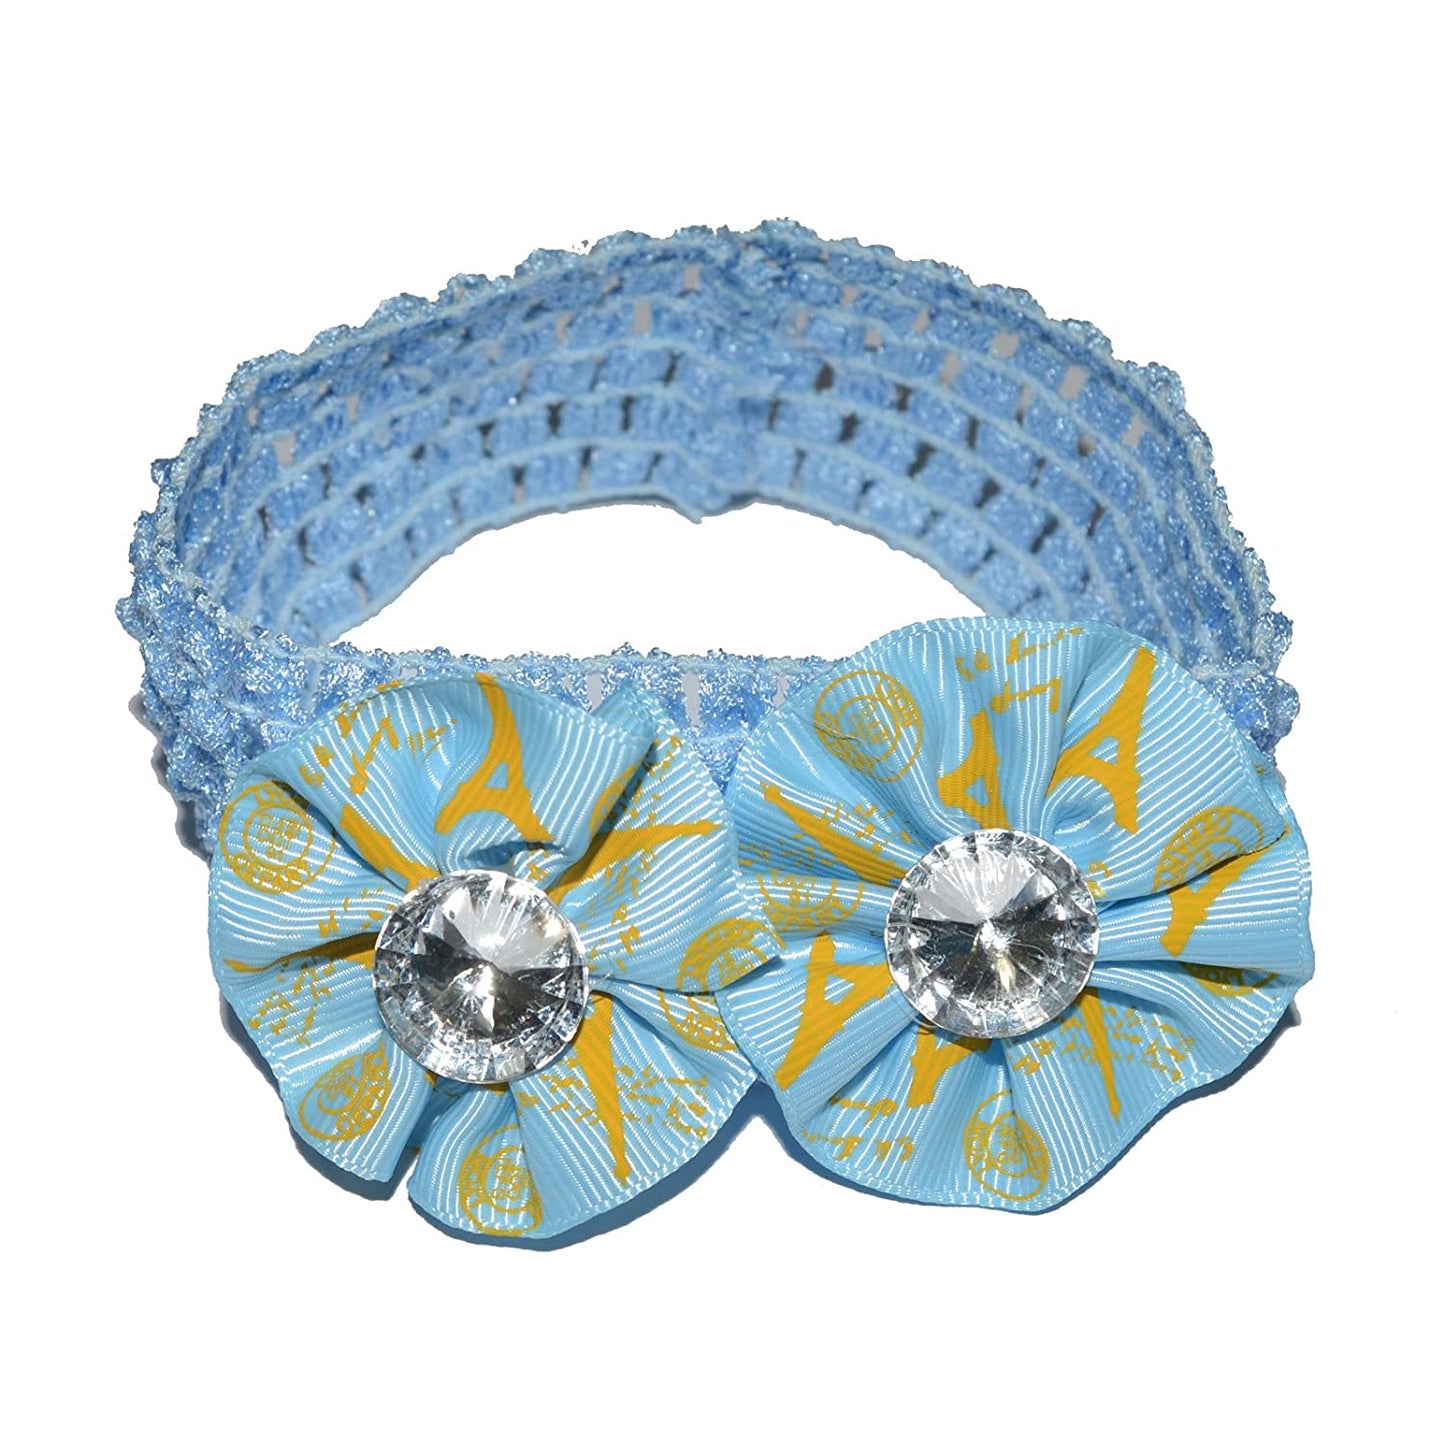 Floral Soft Stretchy Headbands for Baby Girls and Newborn (17-09 Sky Blue Baby Headband)